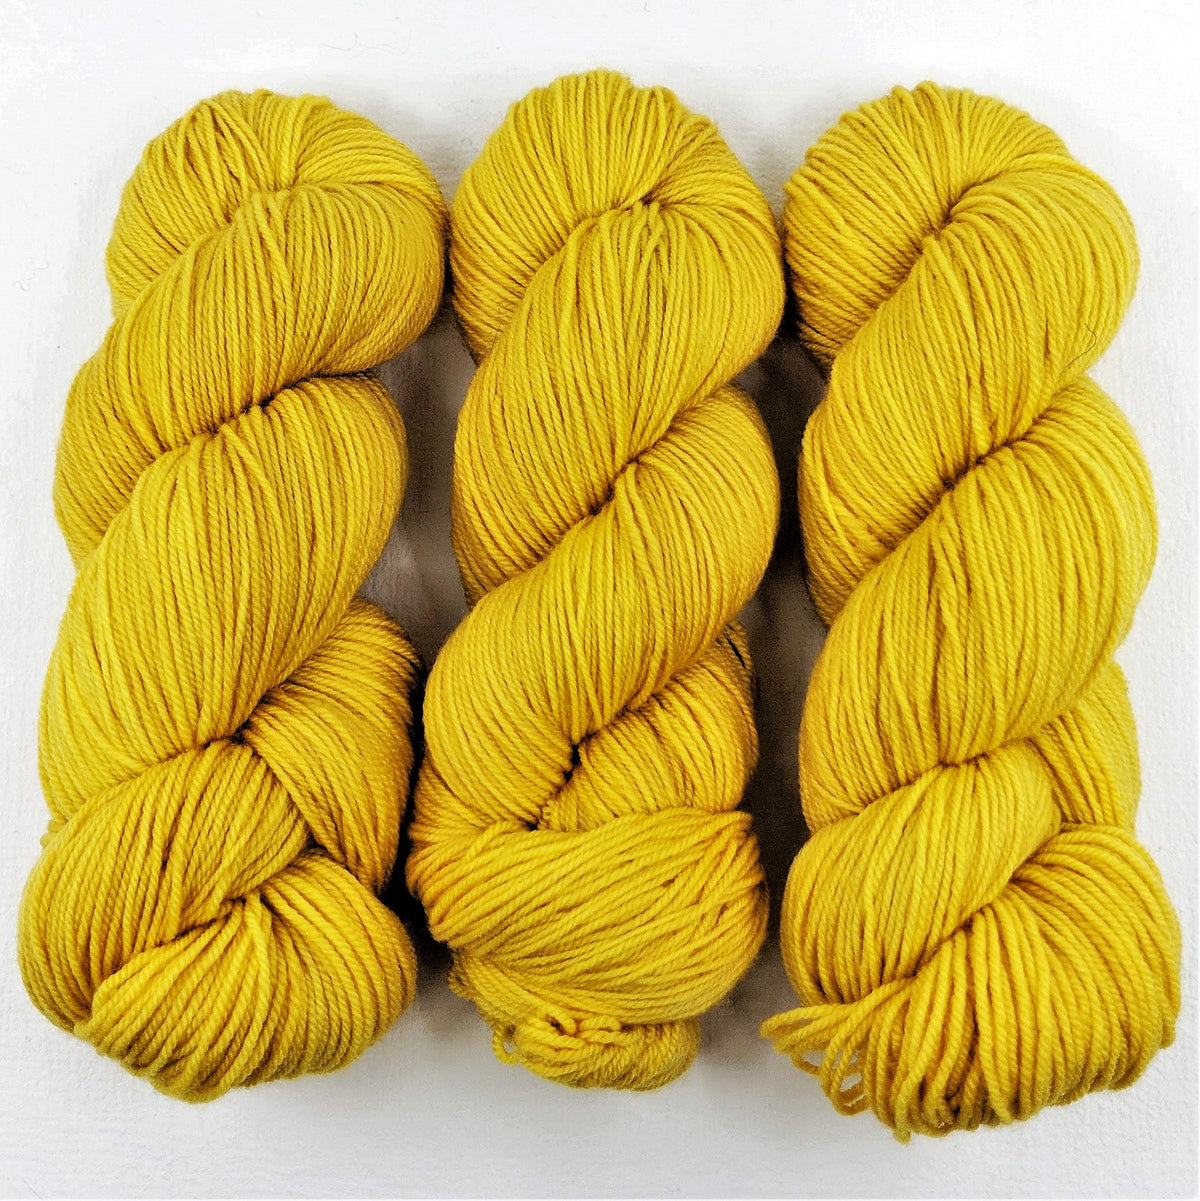 Sunflower - Revival Worsted - Dyed Stock